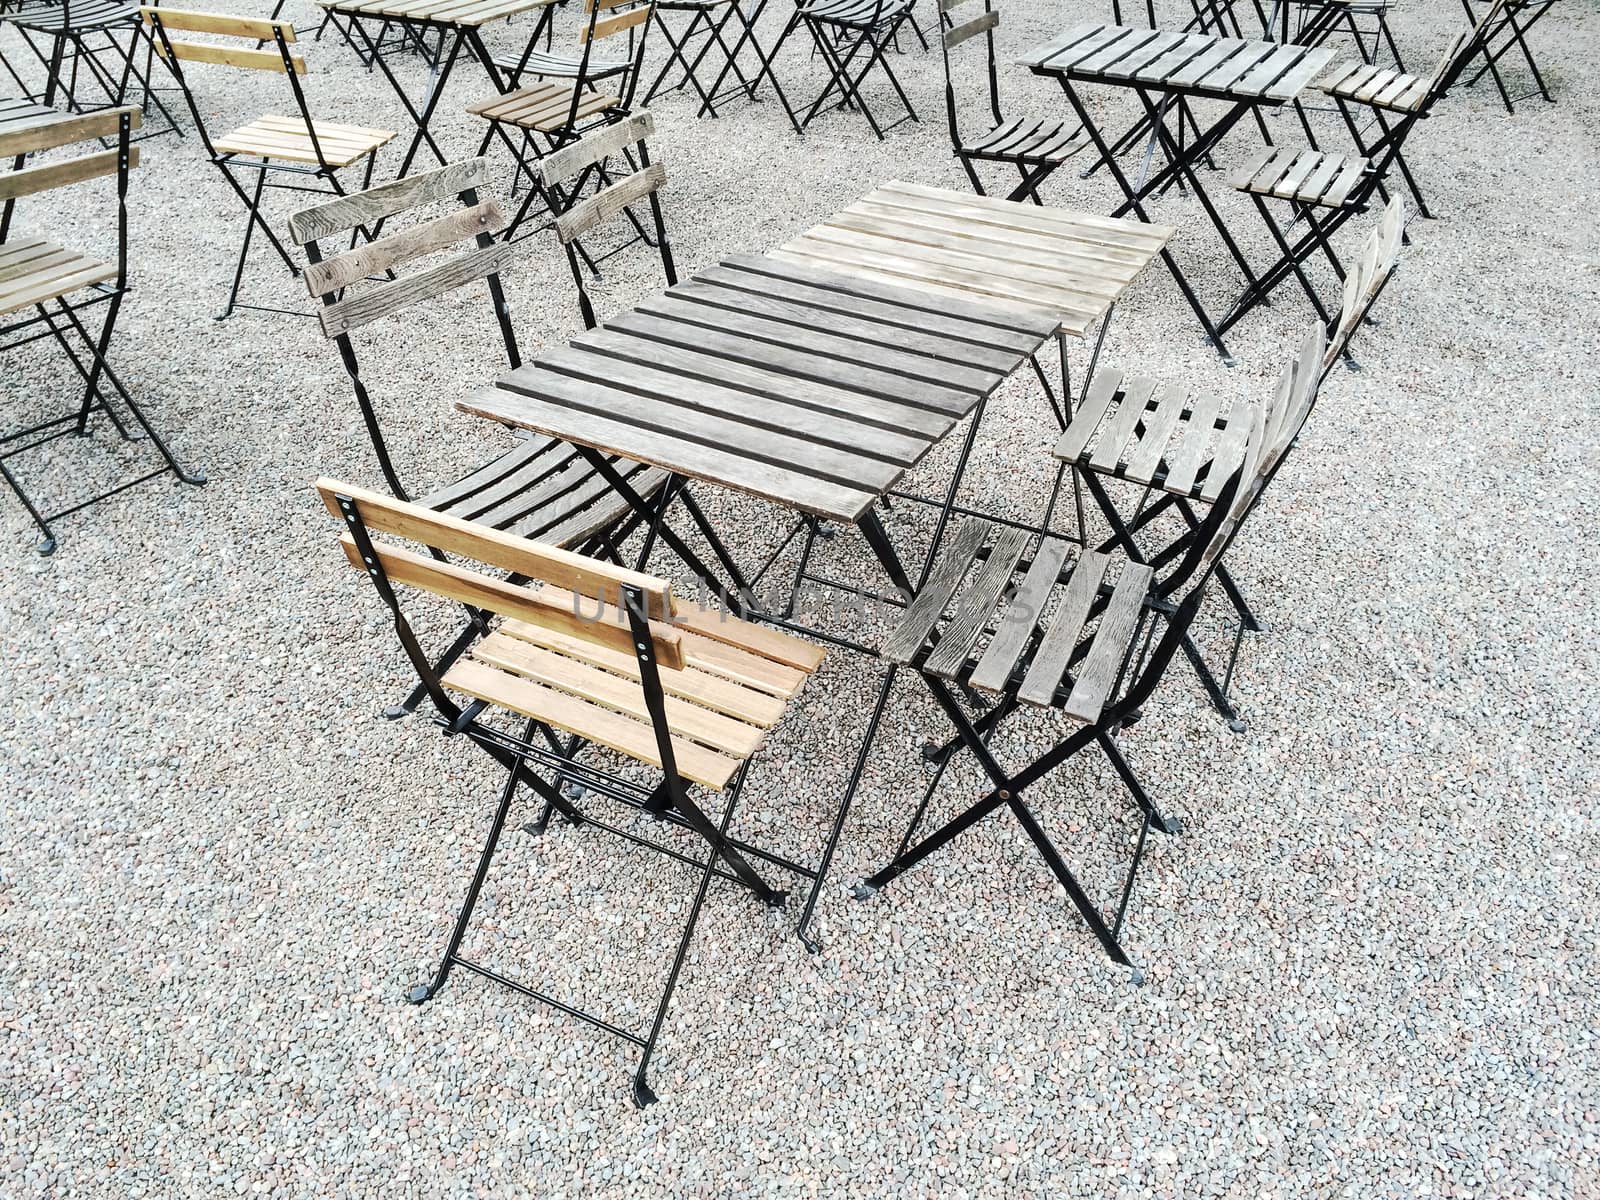 Outdoor cafe with wooden tables and chairs.